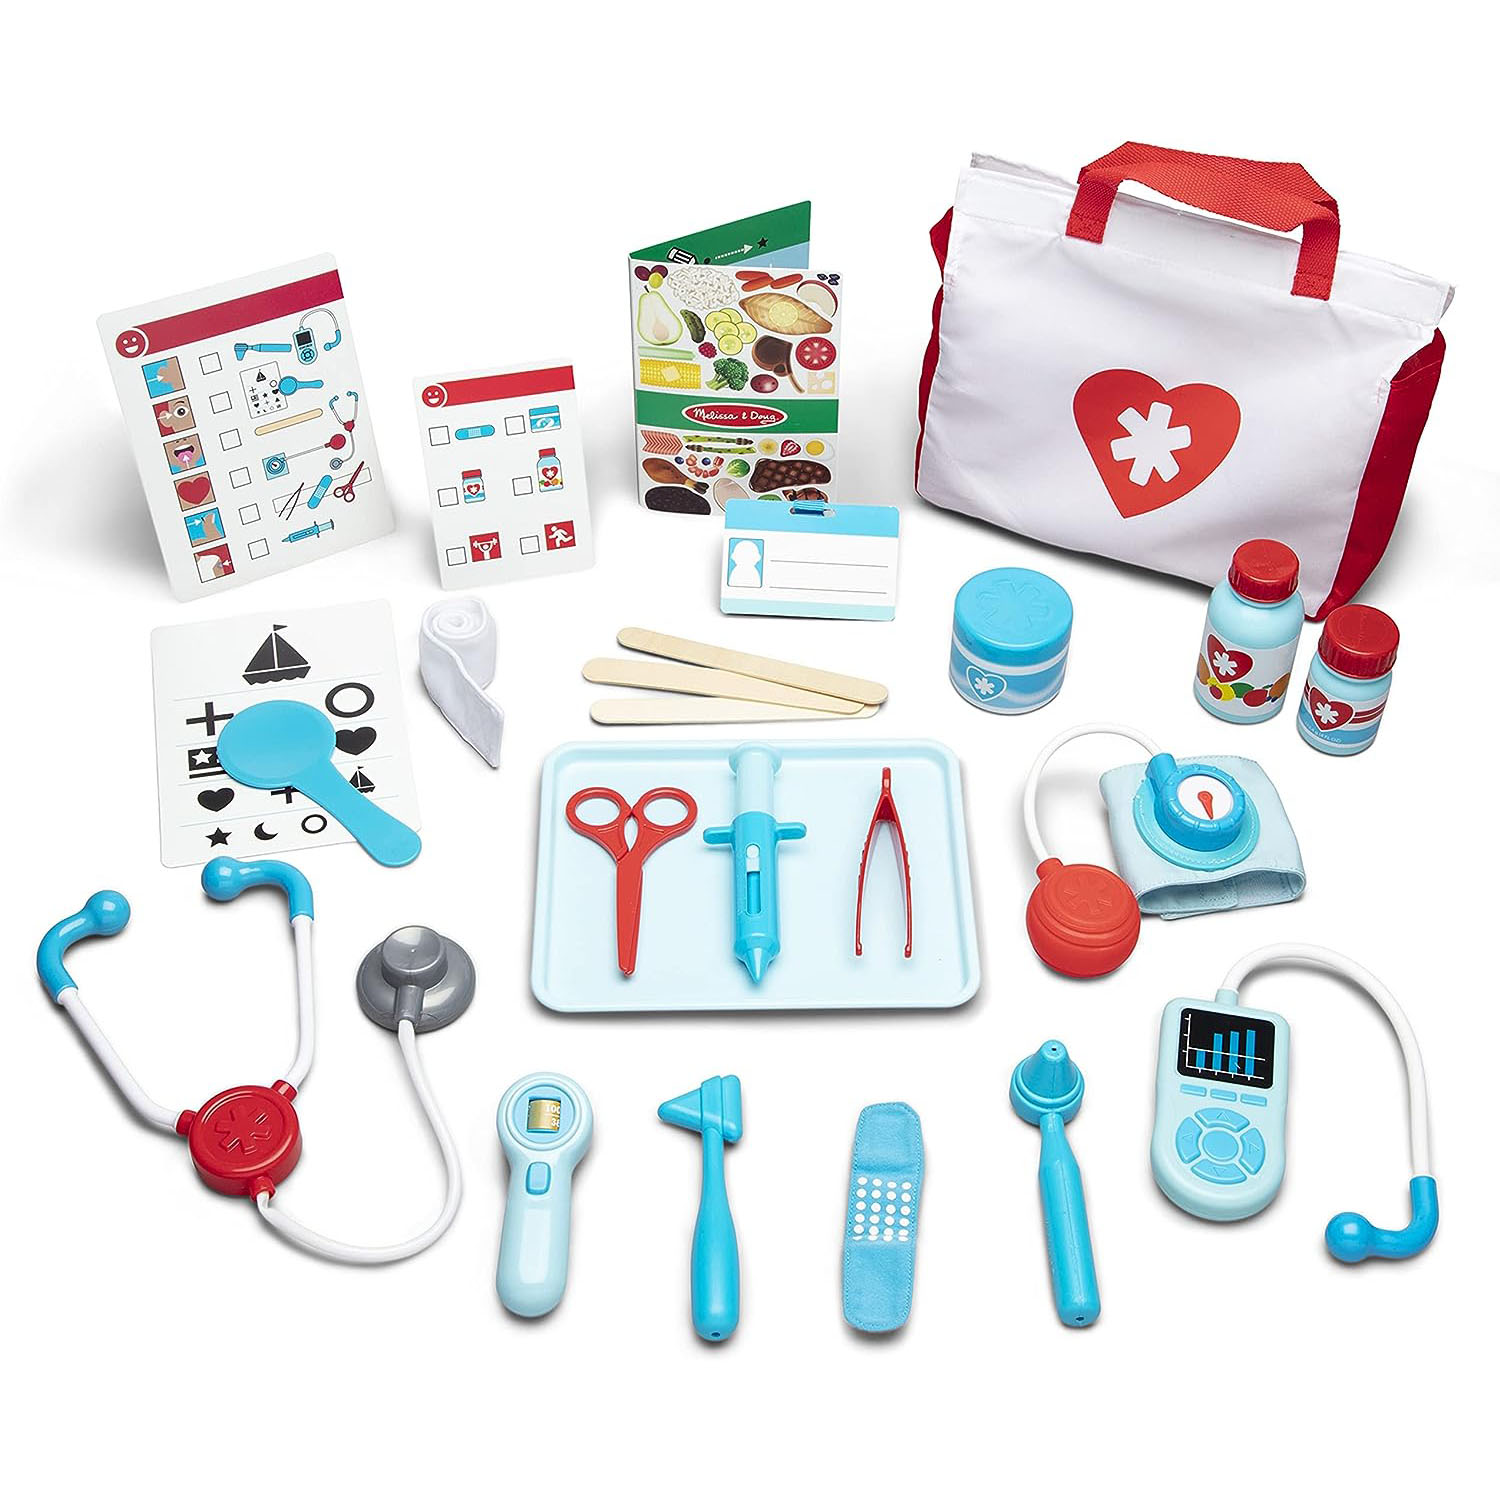 pretend play doctor's kit great for imaginative play